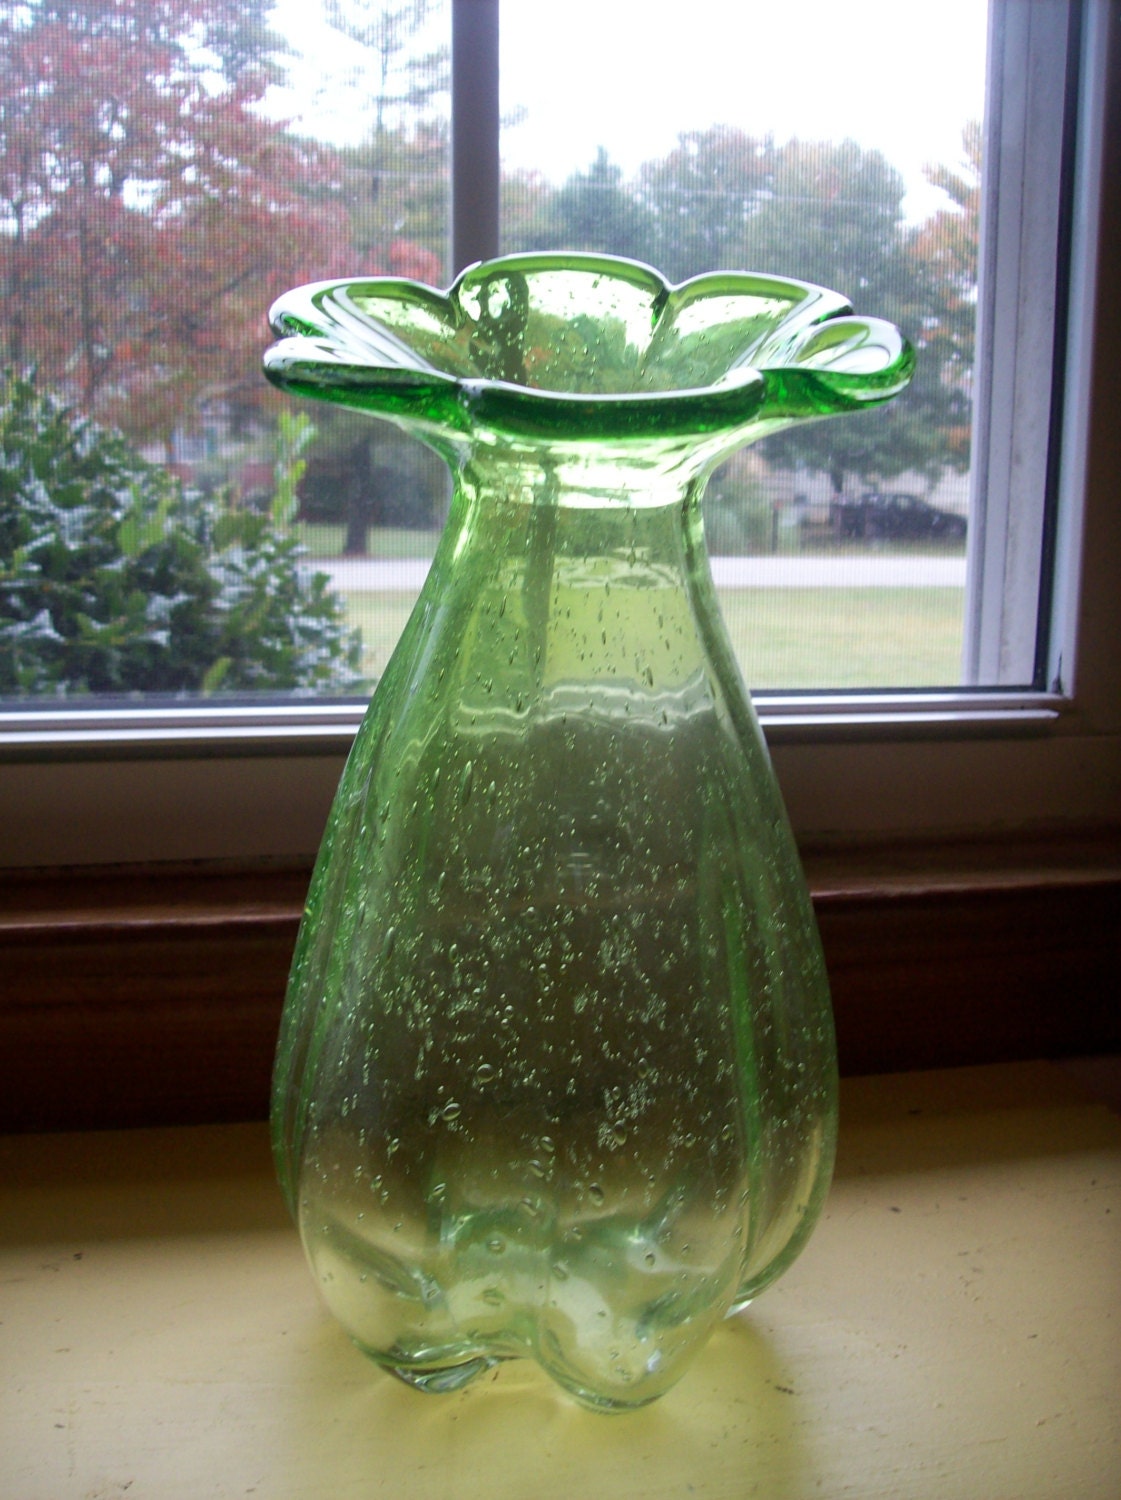 Green Flower Shaped Bubble Glass Vase By Yoneato On Etsy